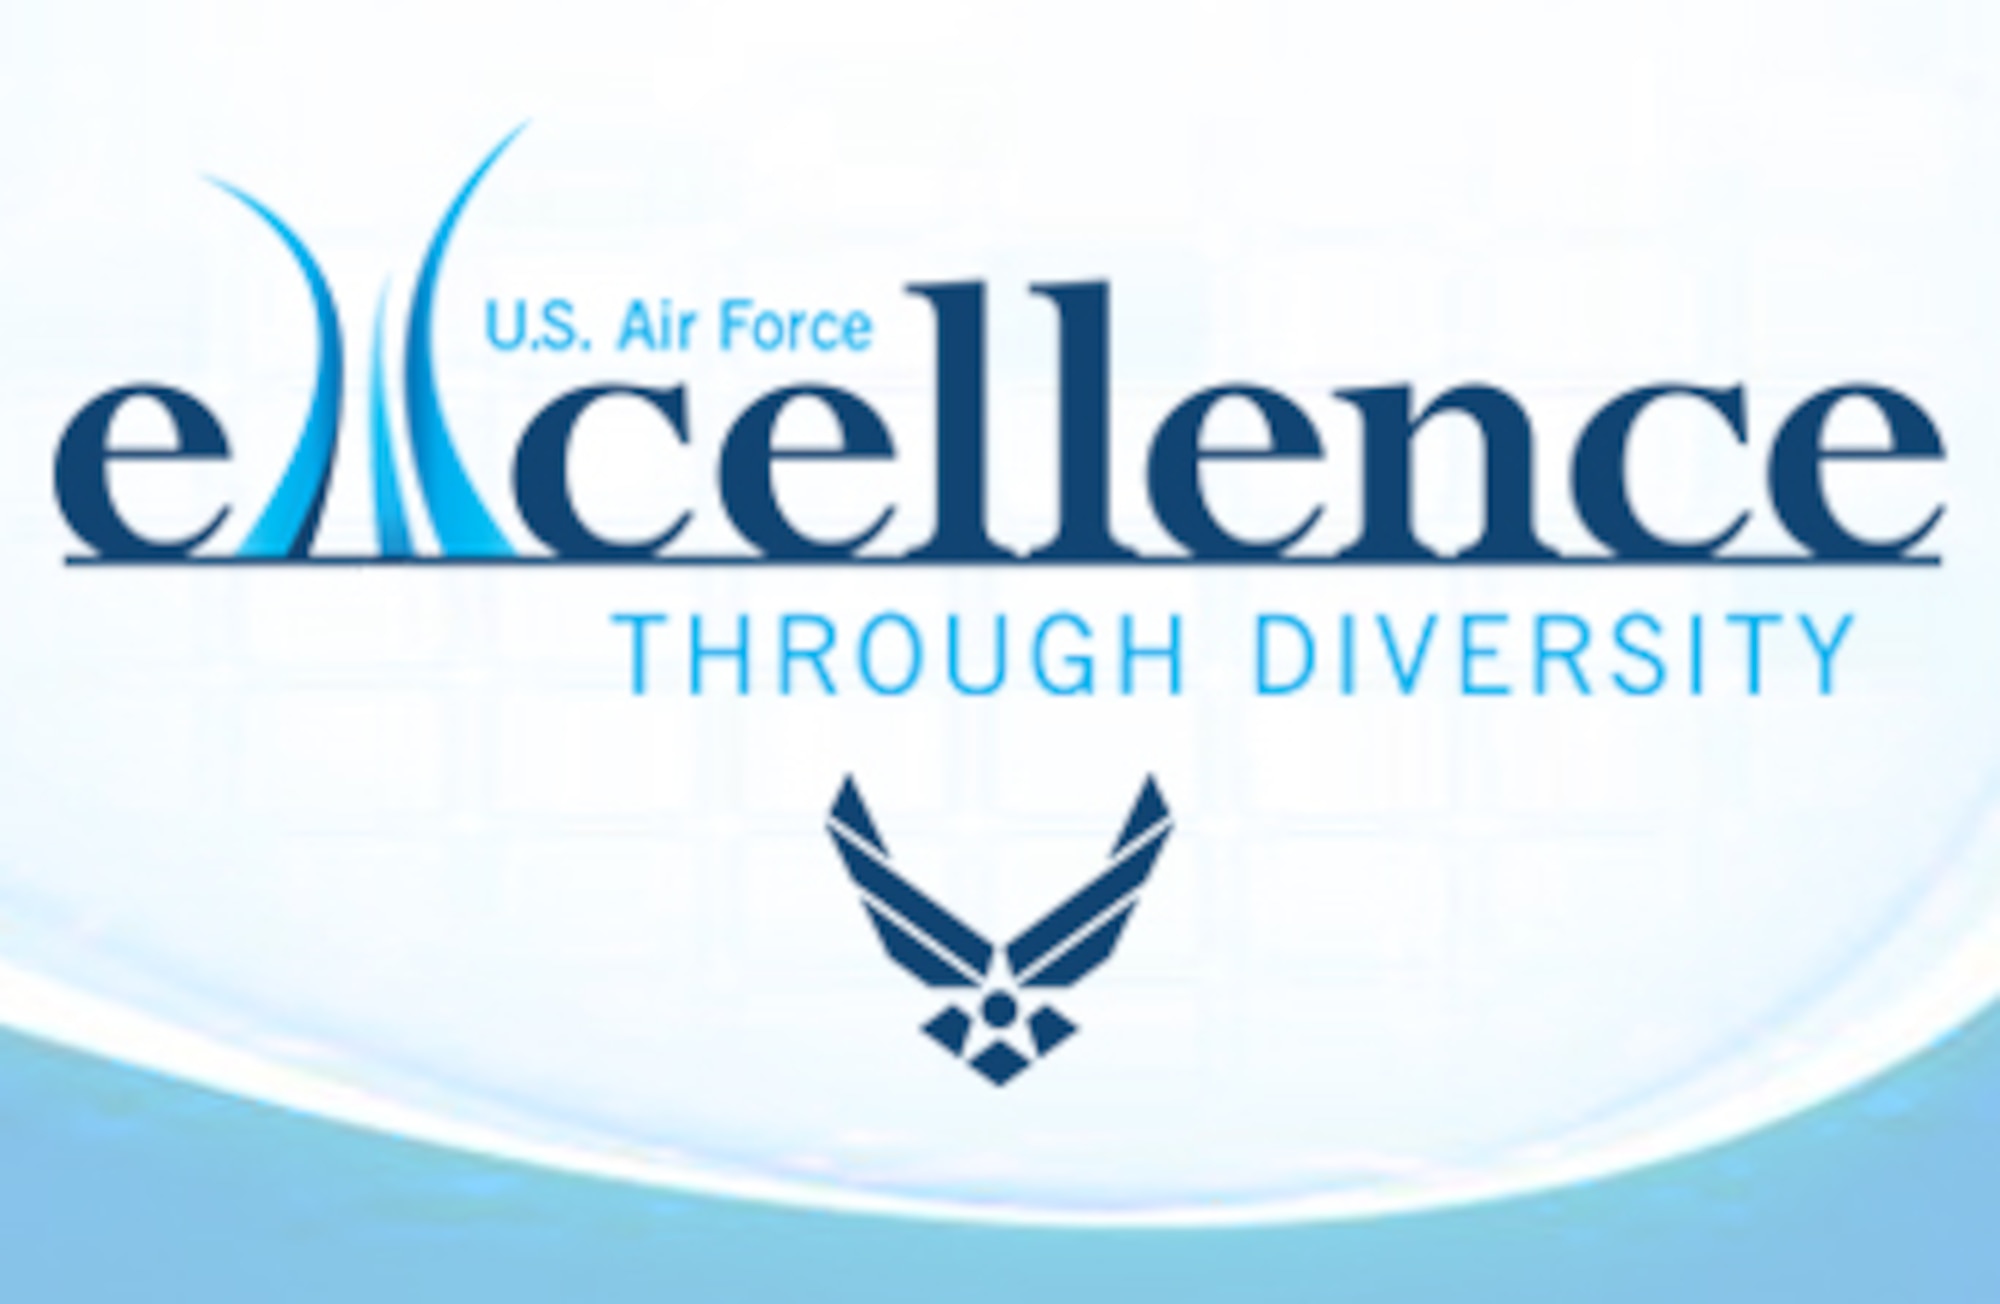 The Air Force broadly defines diversity as a composite of individual characteristics, experiences, and abilities consistent with the Air Force Core Values and the Air Force Mission. Air Force diversity includes but is not limited to: personal life experiences, geographic background, socioeconomic background, cultural knowledge, educational background, work background, language abilities, physical abilities, philosophical/spiritual perspectives, age, race, ethnicity, and gender. 